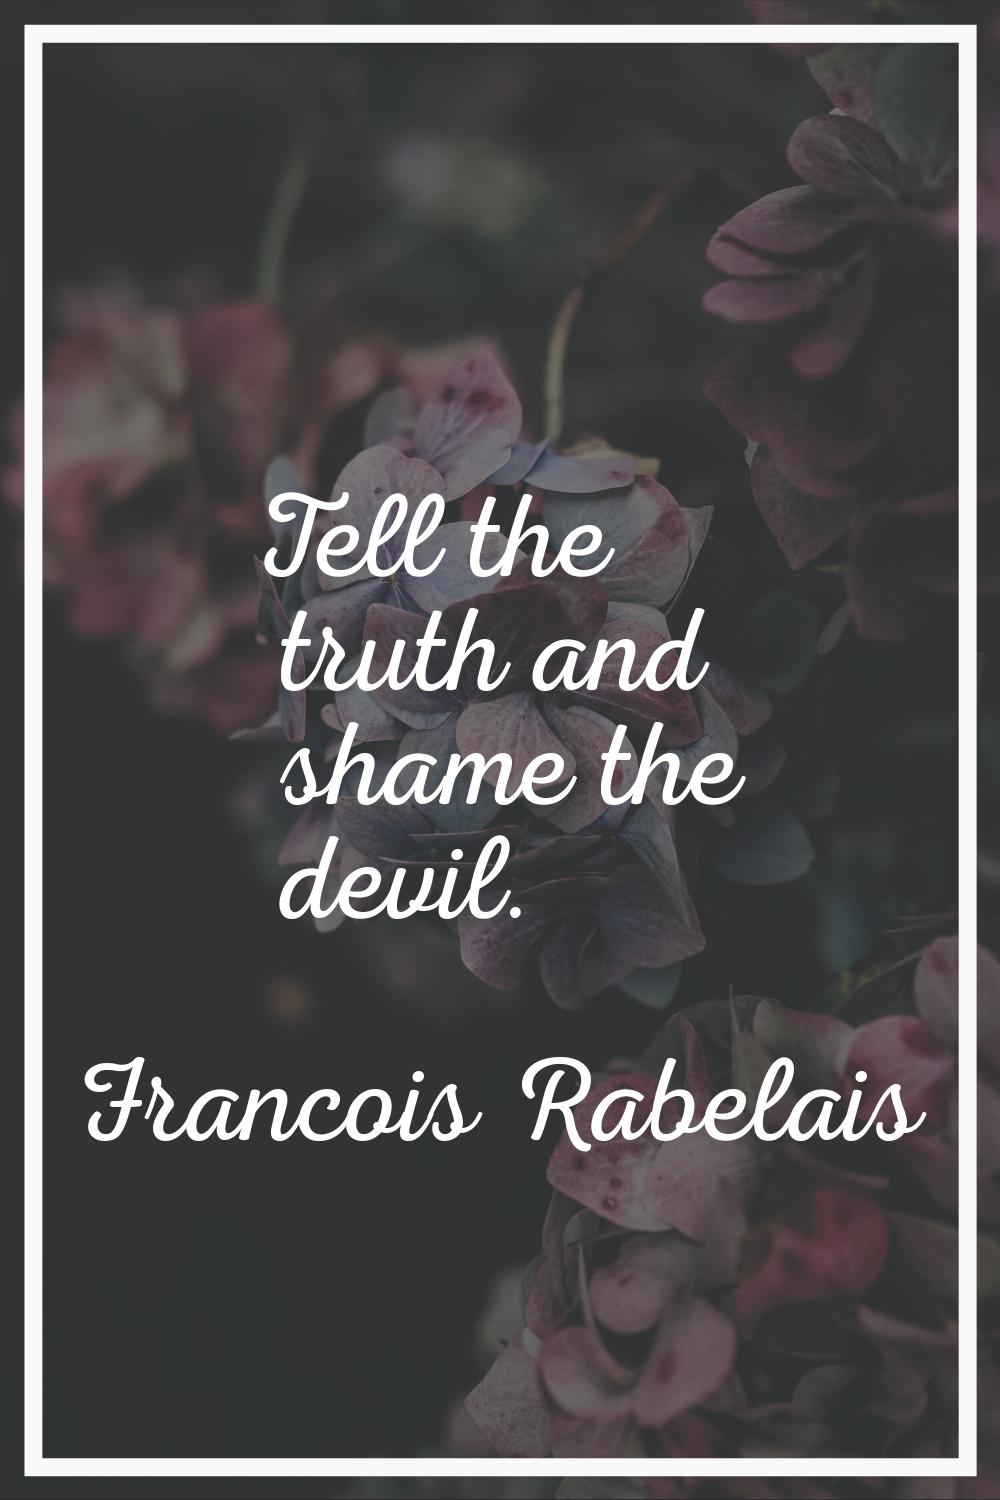 Tell the truth and shame the devil.